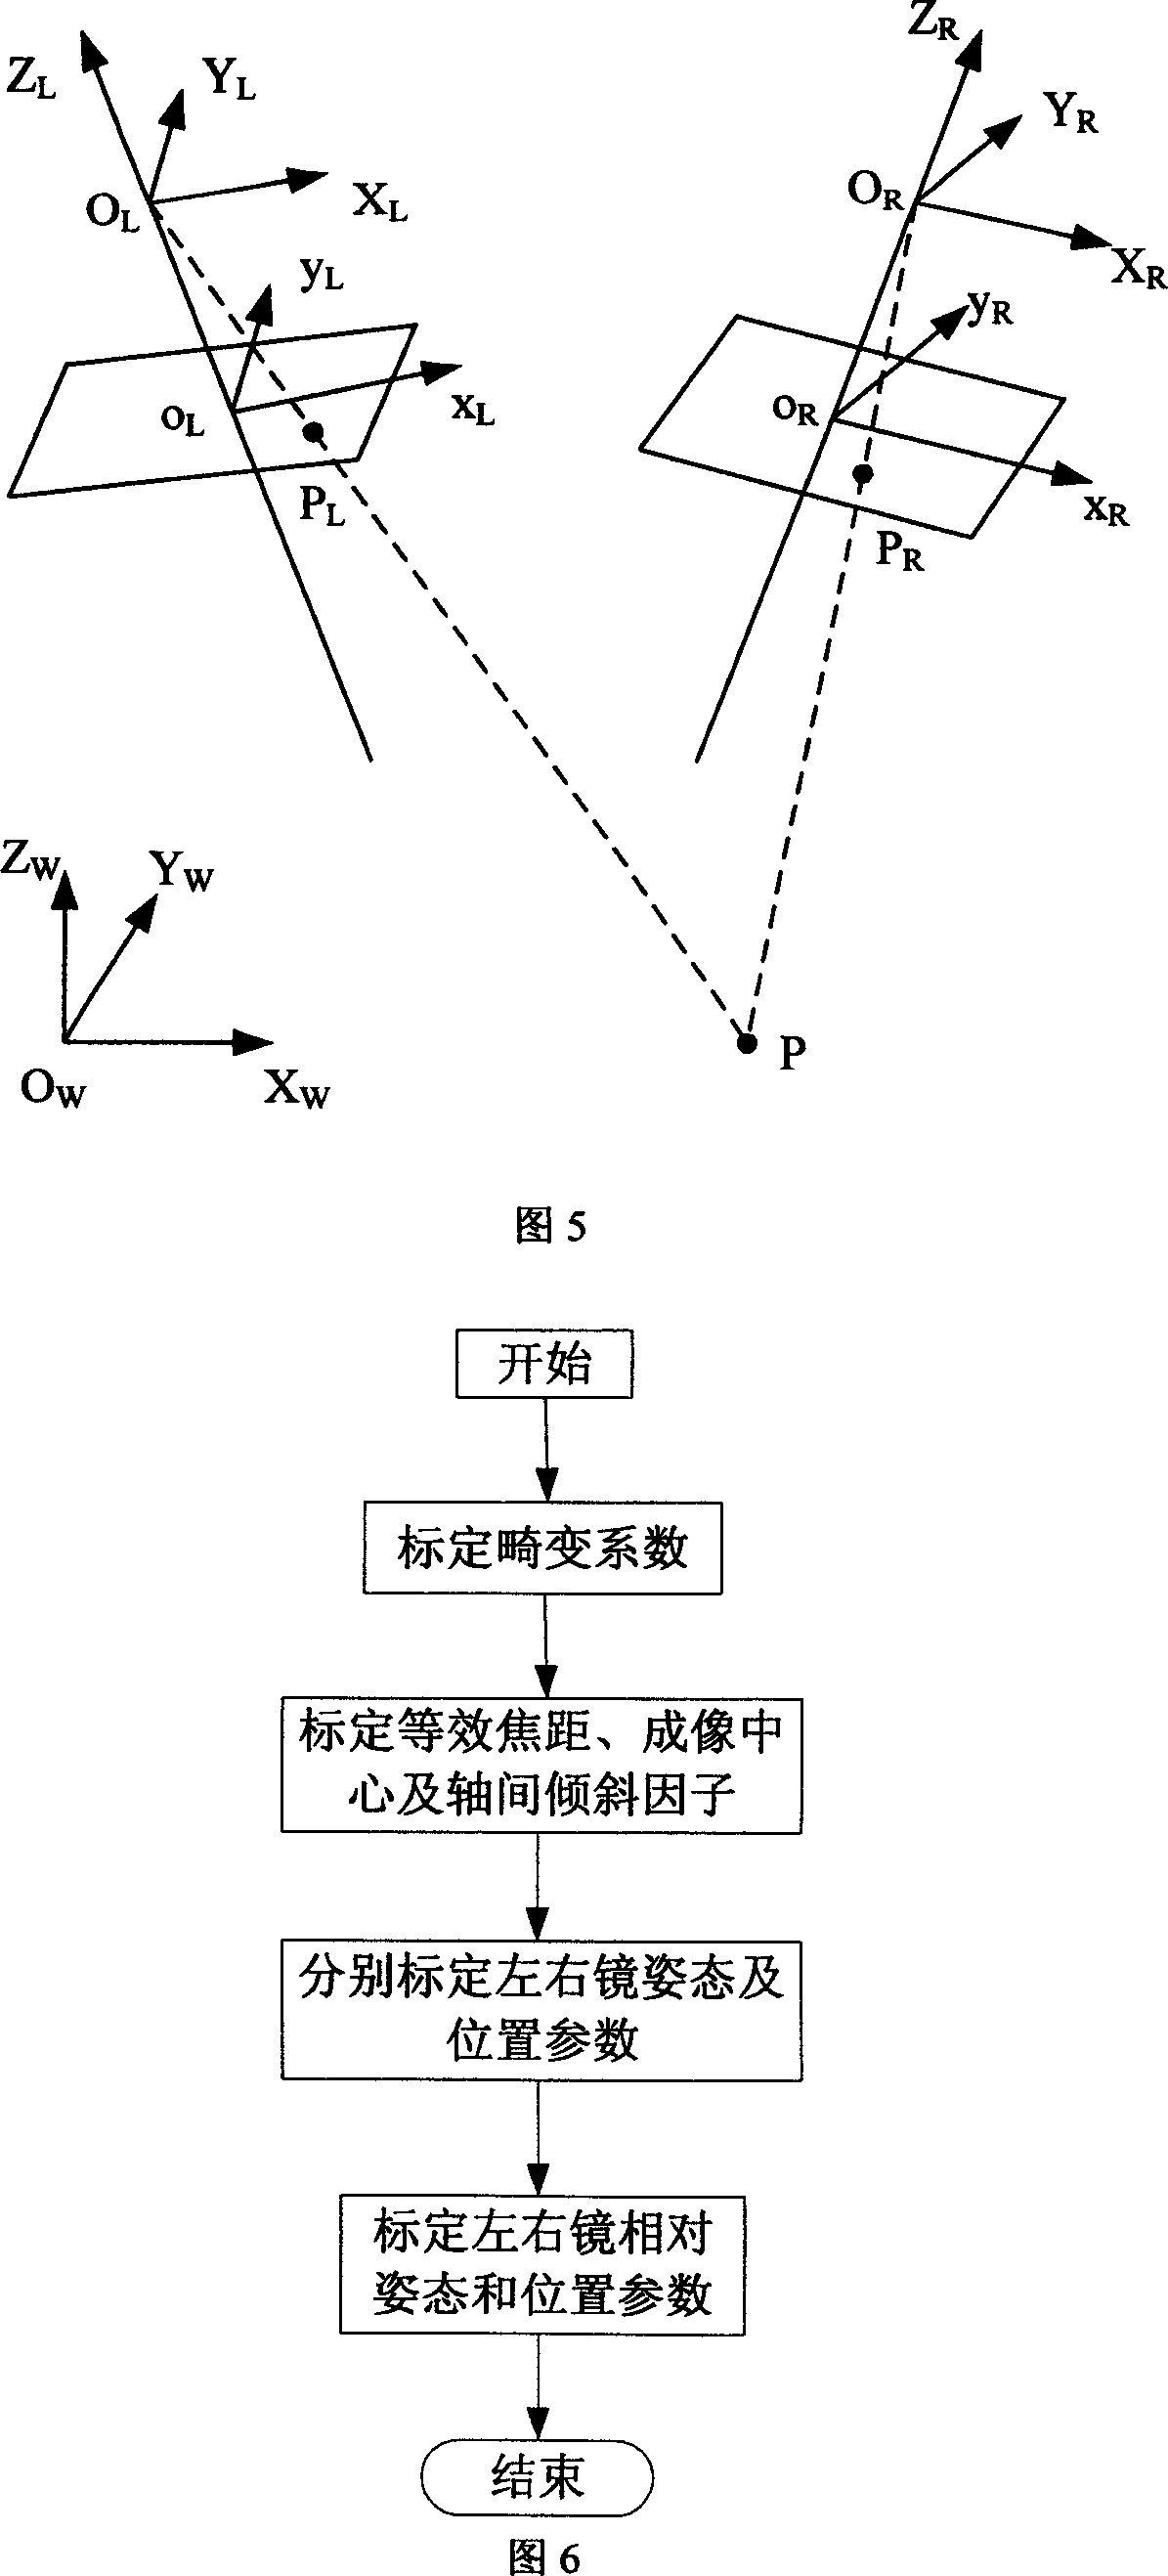 Double-camera calibrating method in three-dimensional scanning system